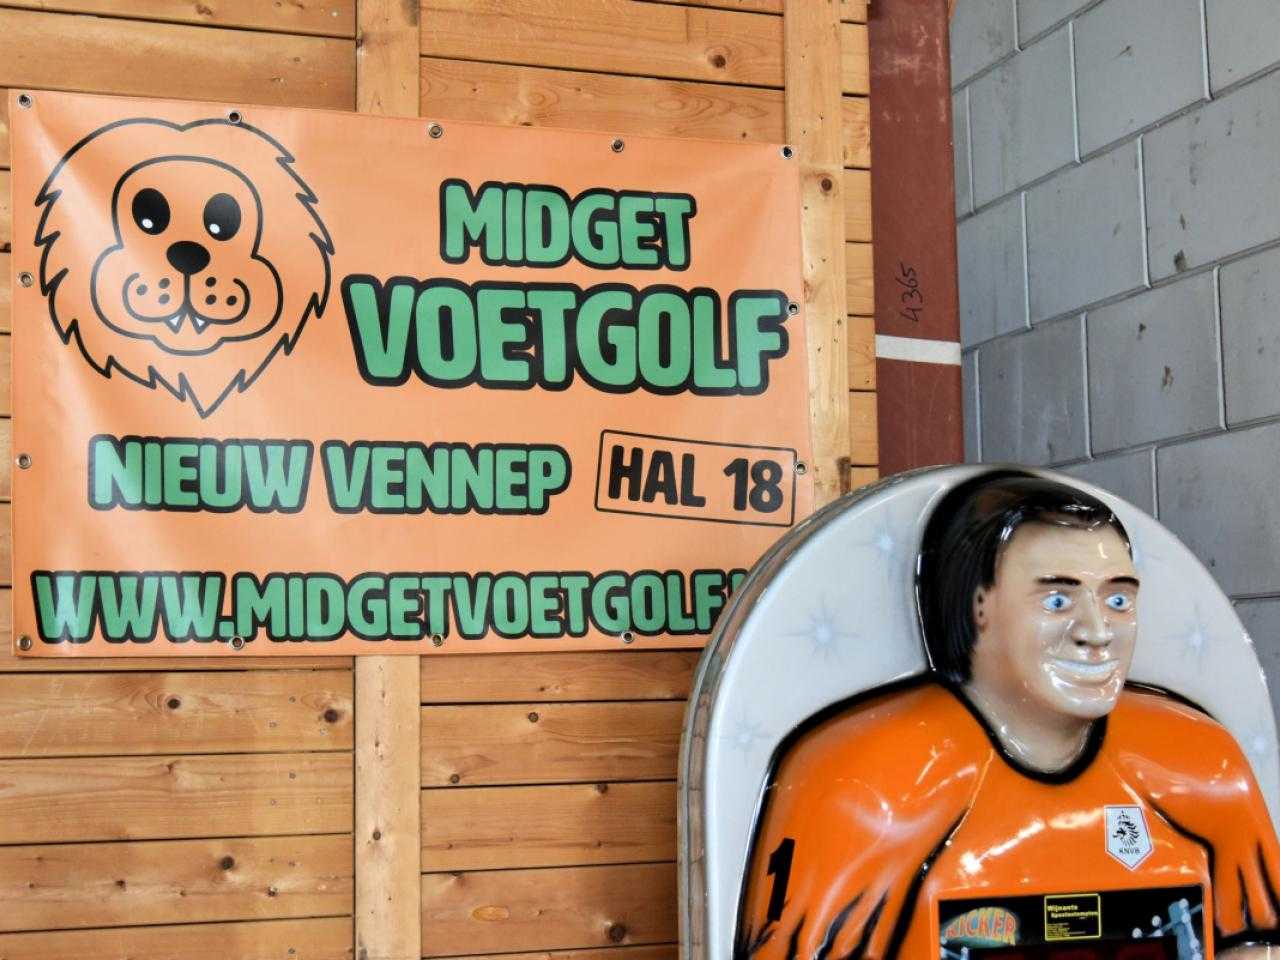 Cloth with text Midget footgolf and plastic doll in front of it